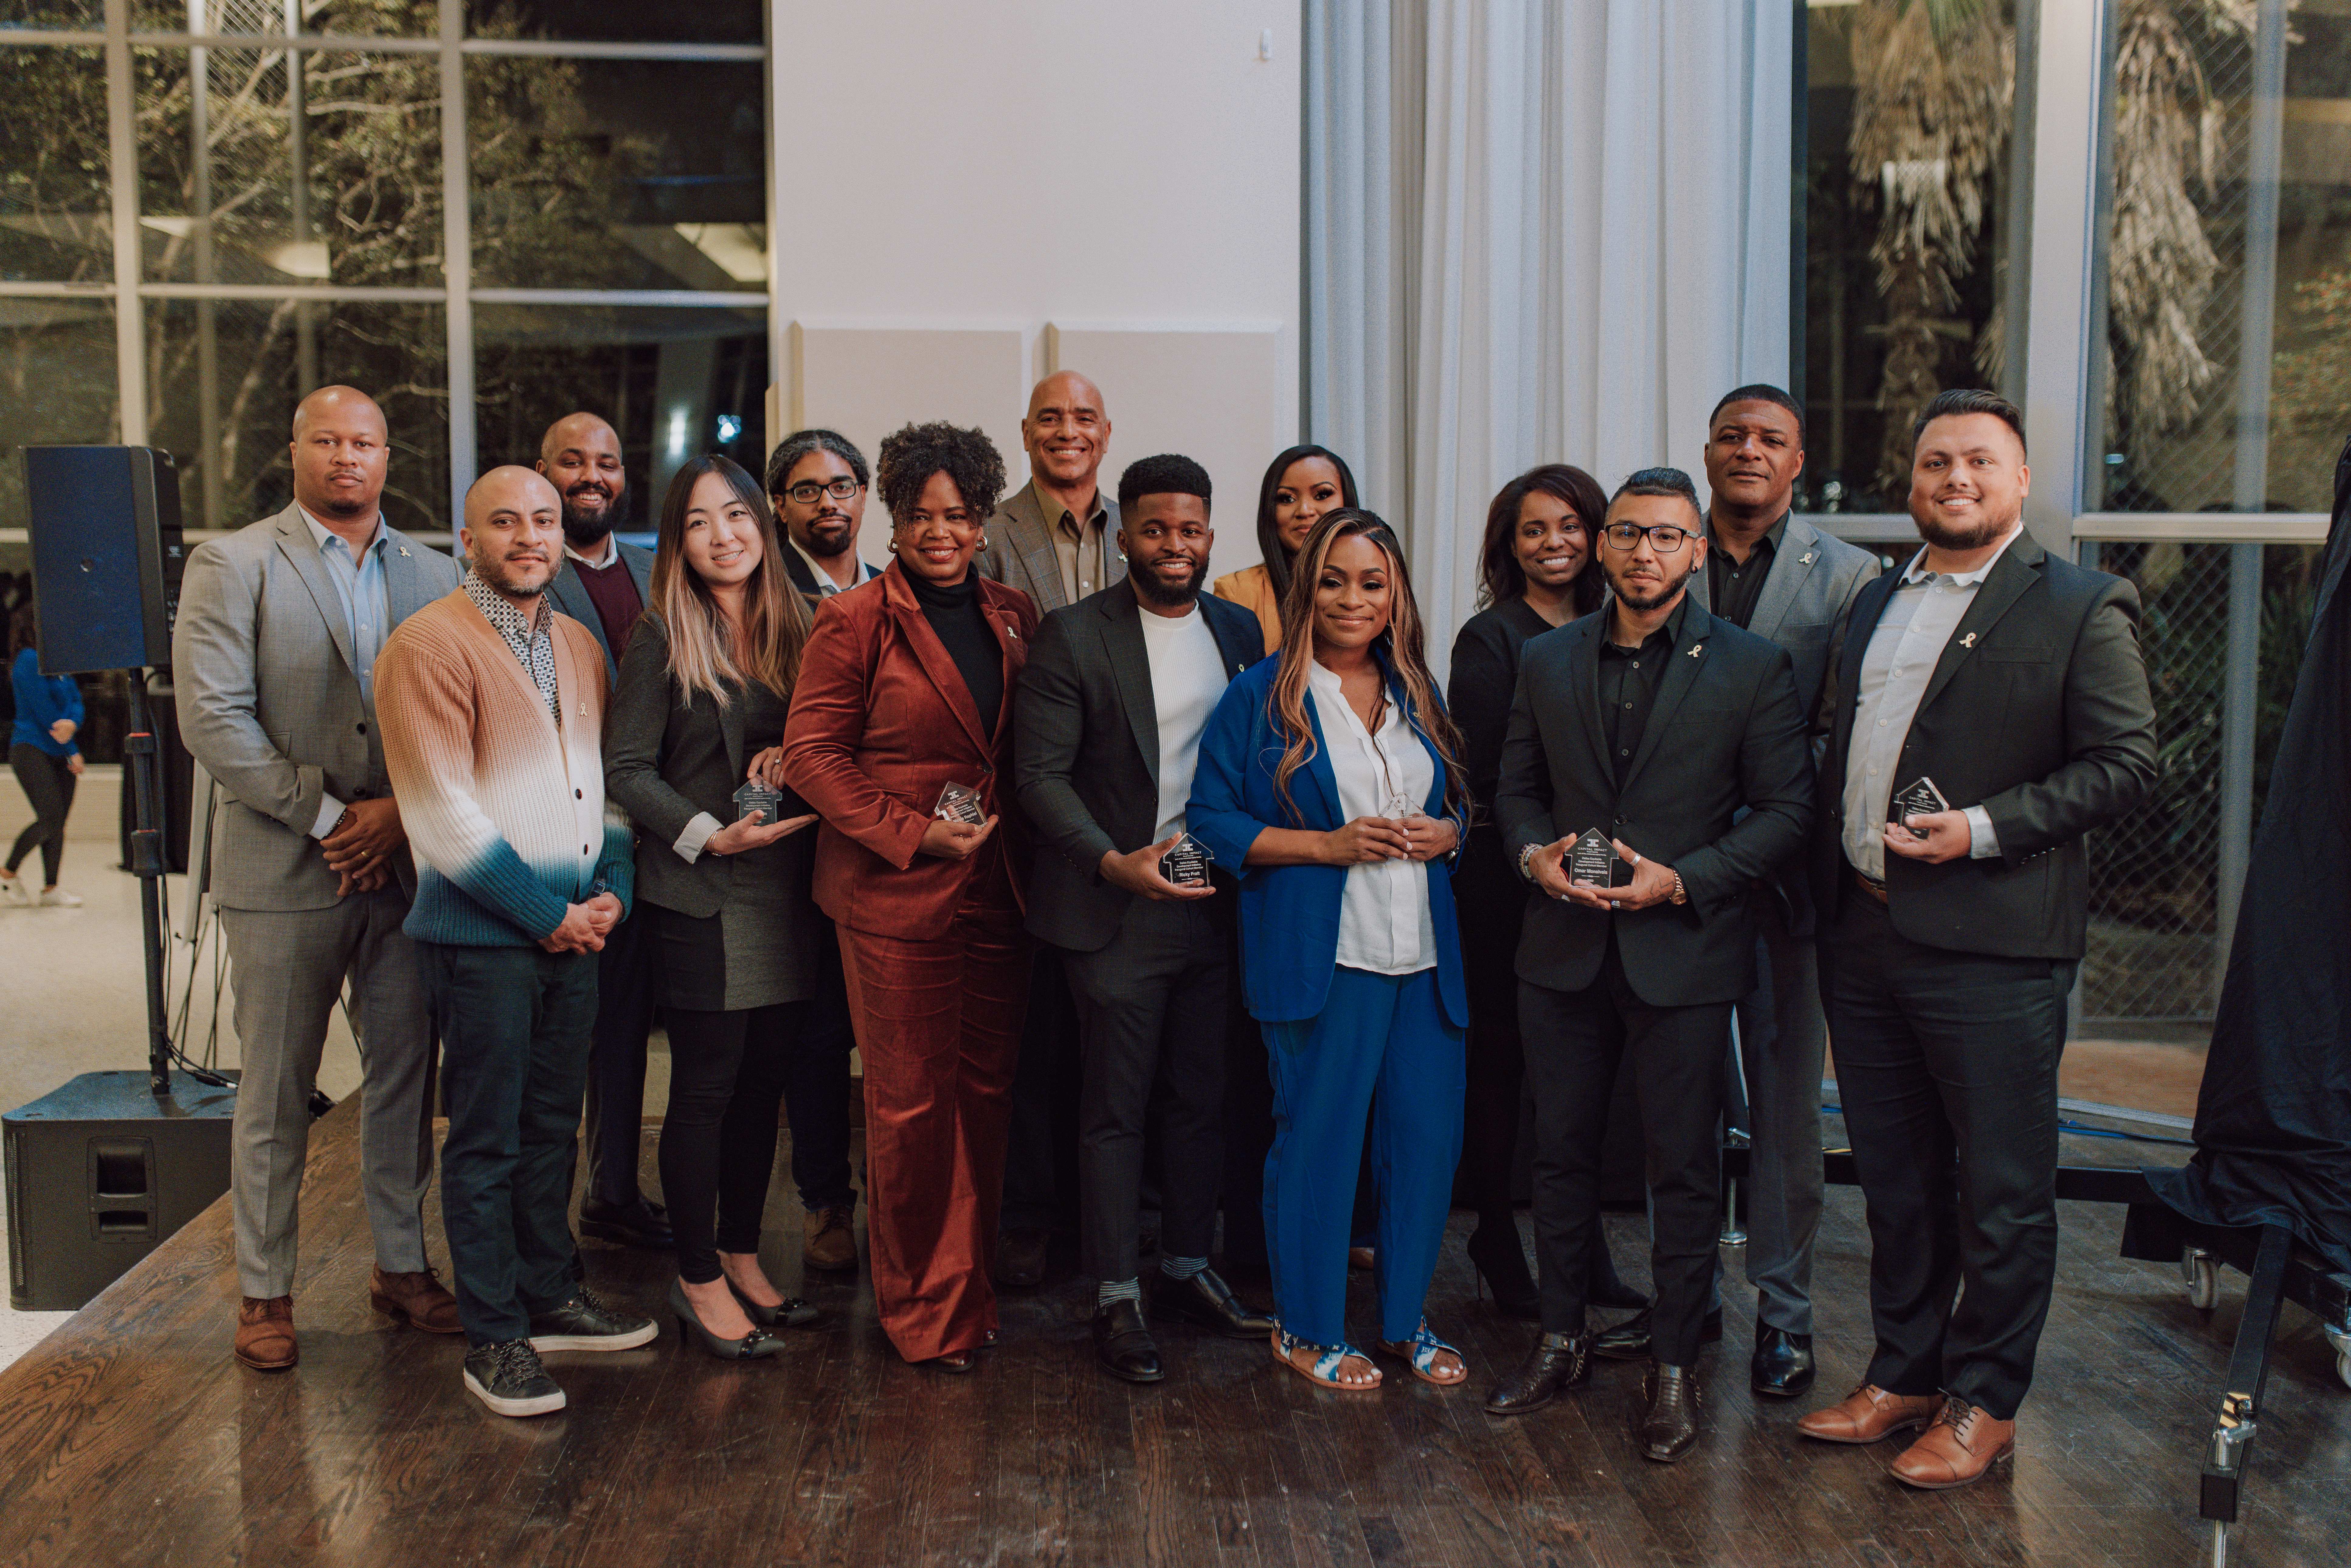 Alumni from the Equitable Development Initiative cohort in Dallas, Texas. A similar program, called the Austin Small Developer Training, is now accepting applicants in Austin, Texas.